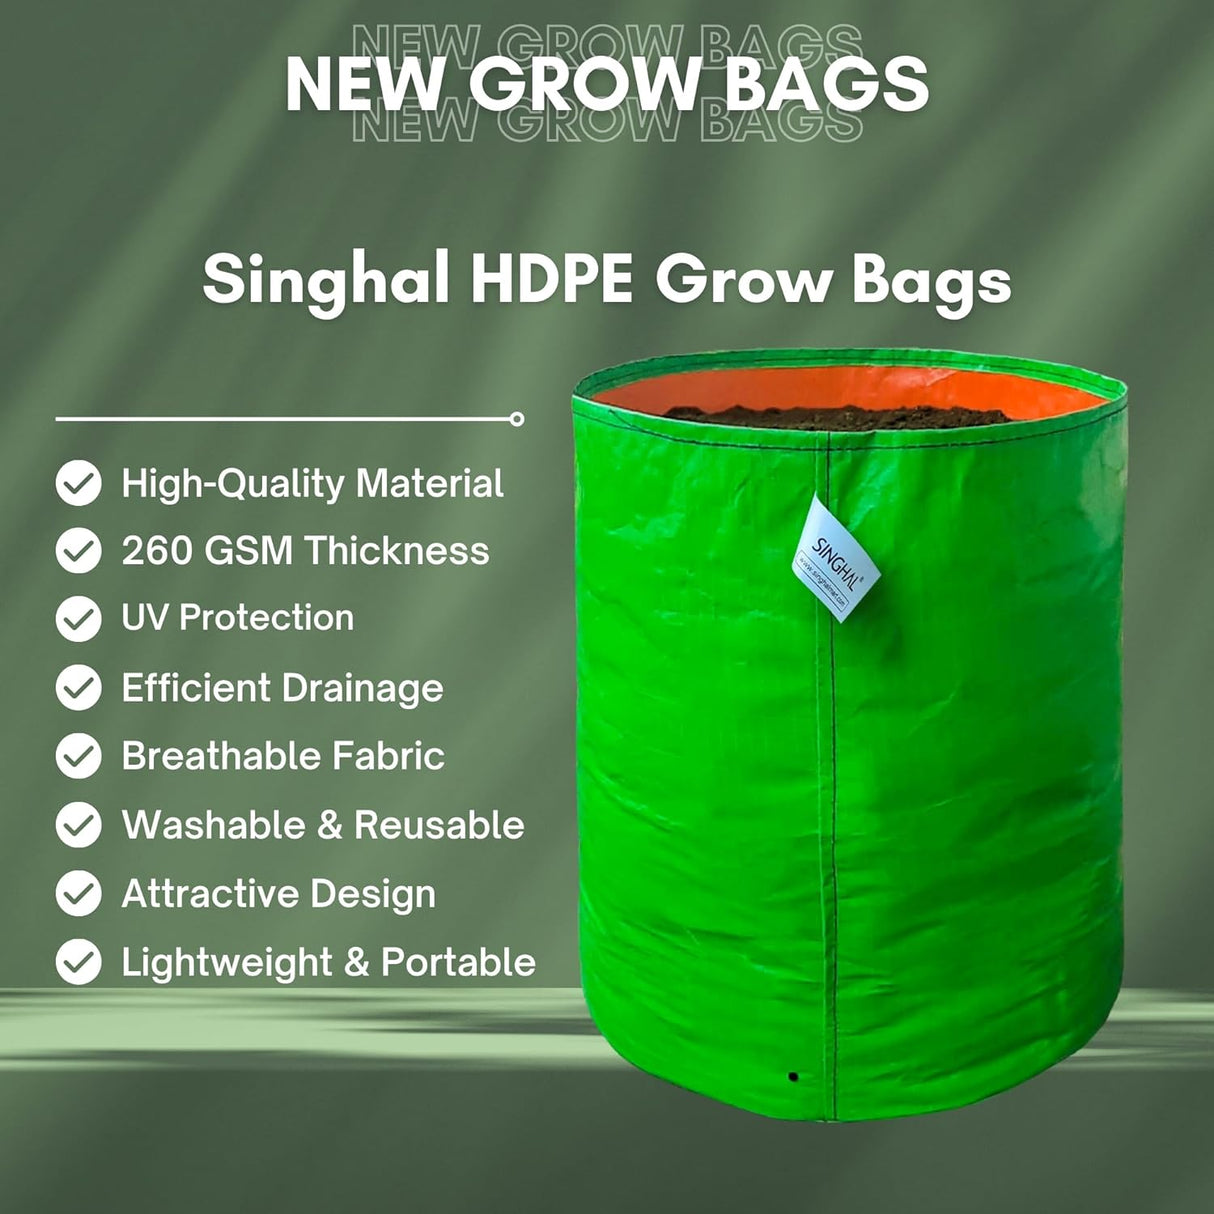 SINGHAL 24x24 inch Grow Bags Pack of 5 for Home Gardening, HDPE Plants Bag for Fruits, Vegetables Flowers, 260 GSM Grow Bag, UV Protected